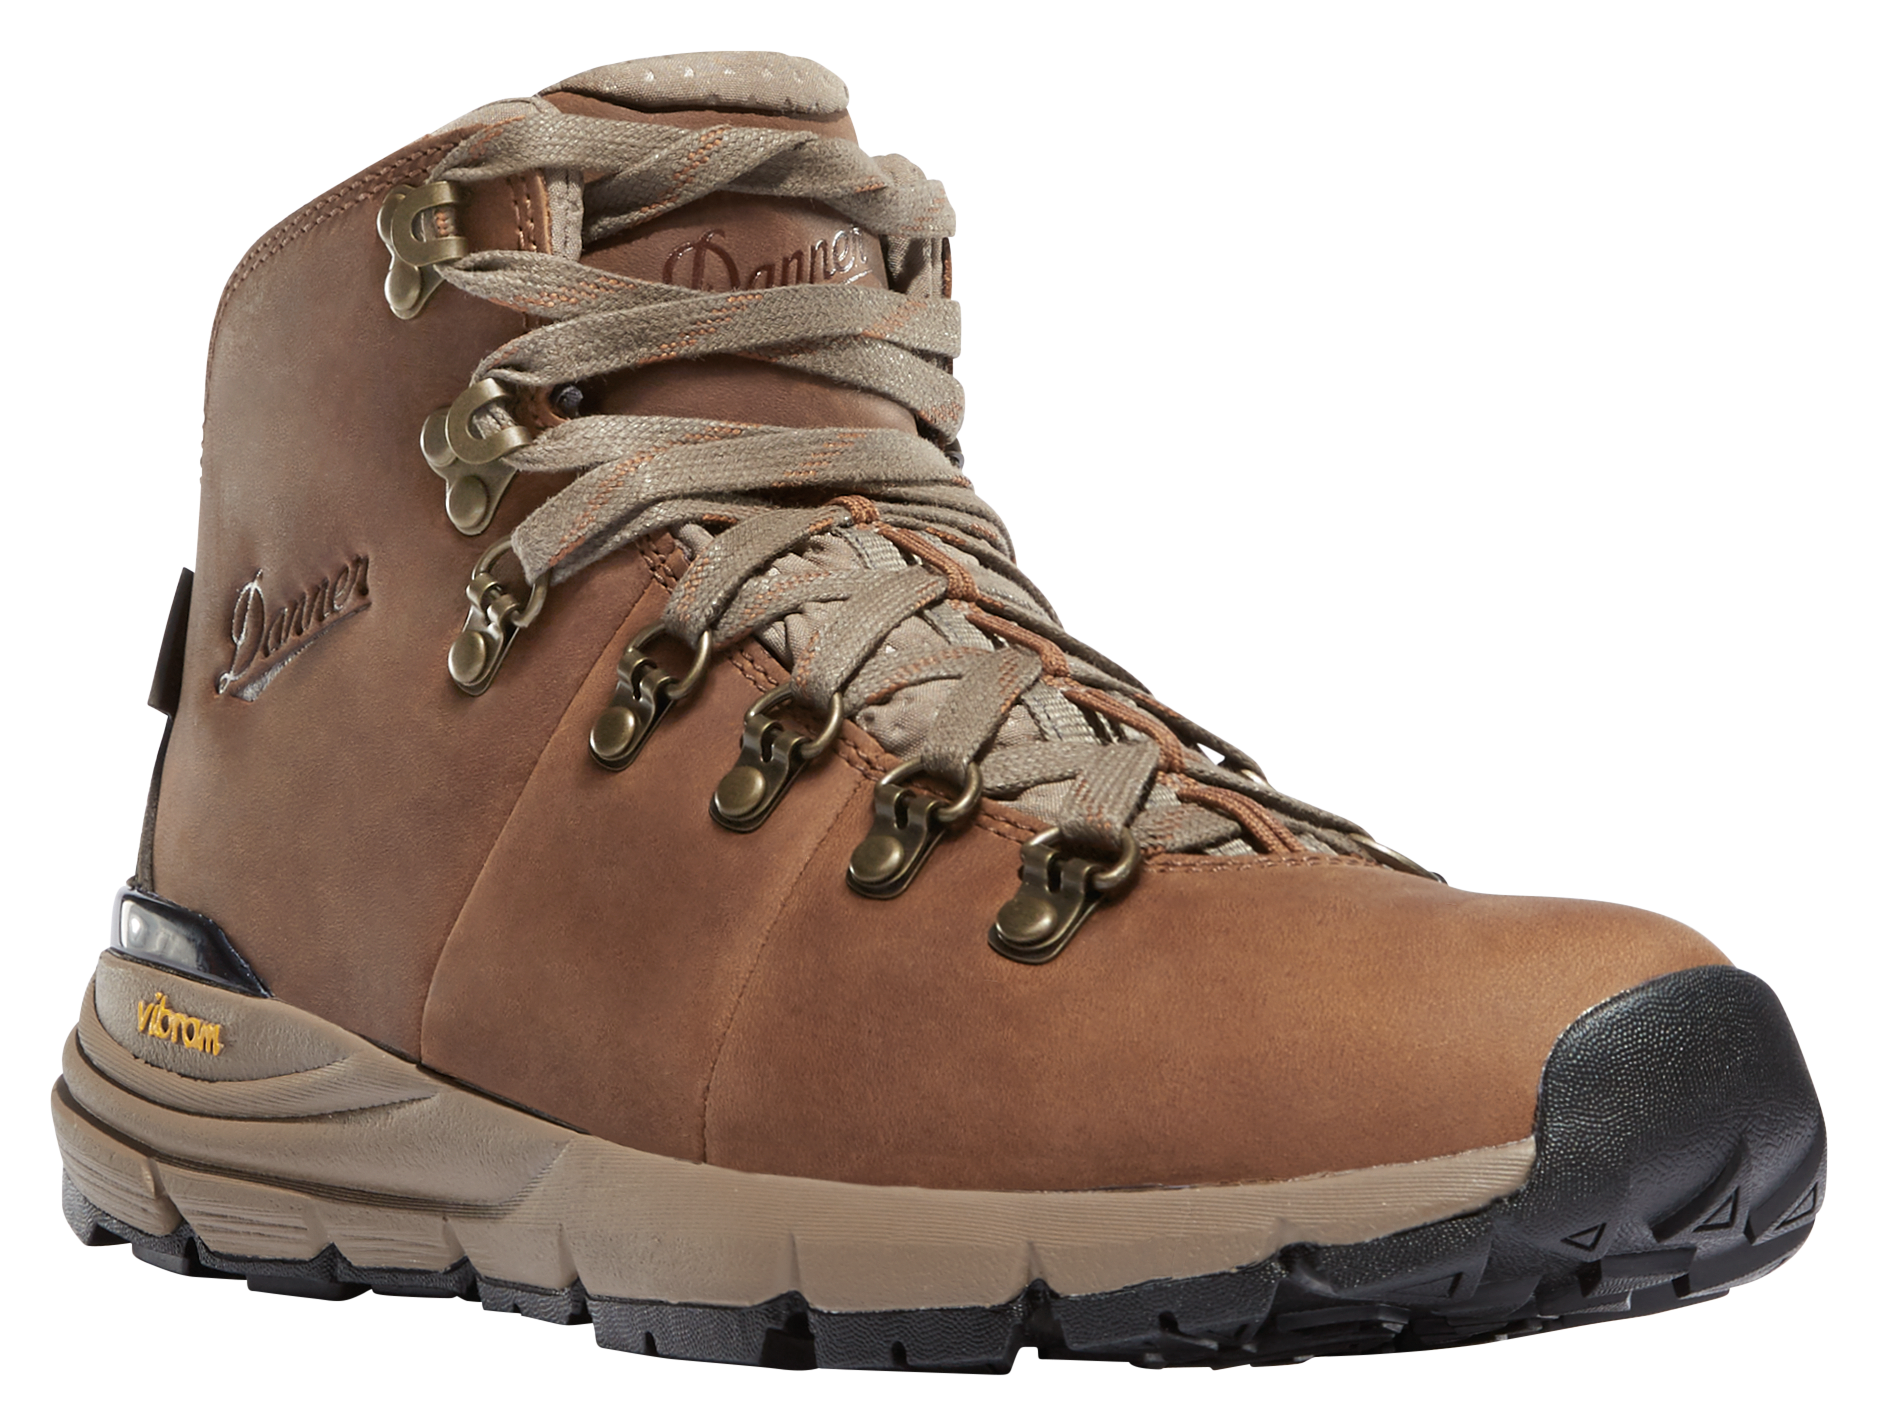 Danner Mountain 600 Leather Waterproof Hiking Boots for Ladies - Rich Brown - 10.5M